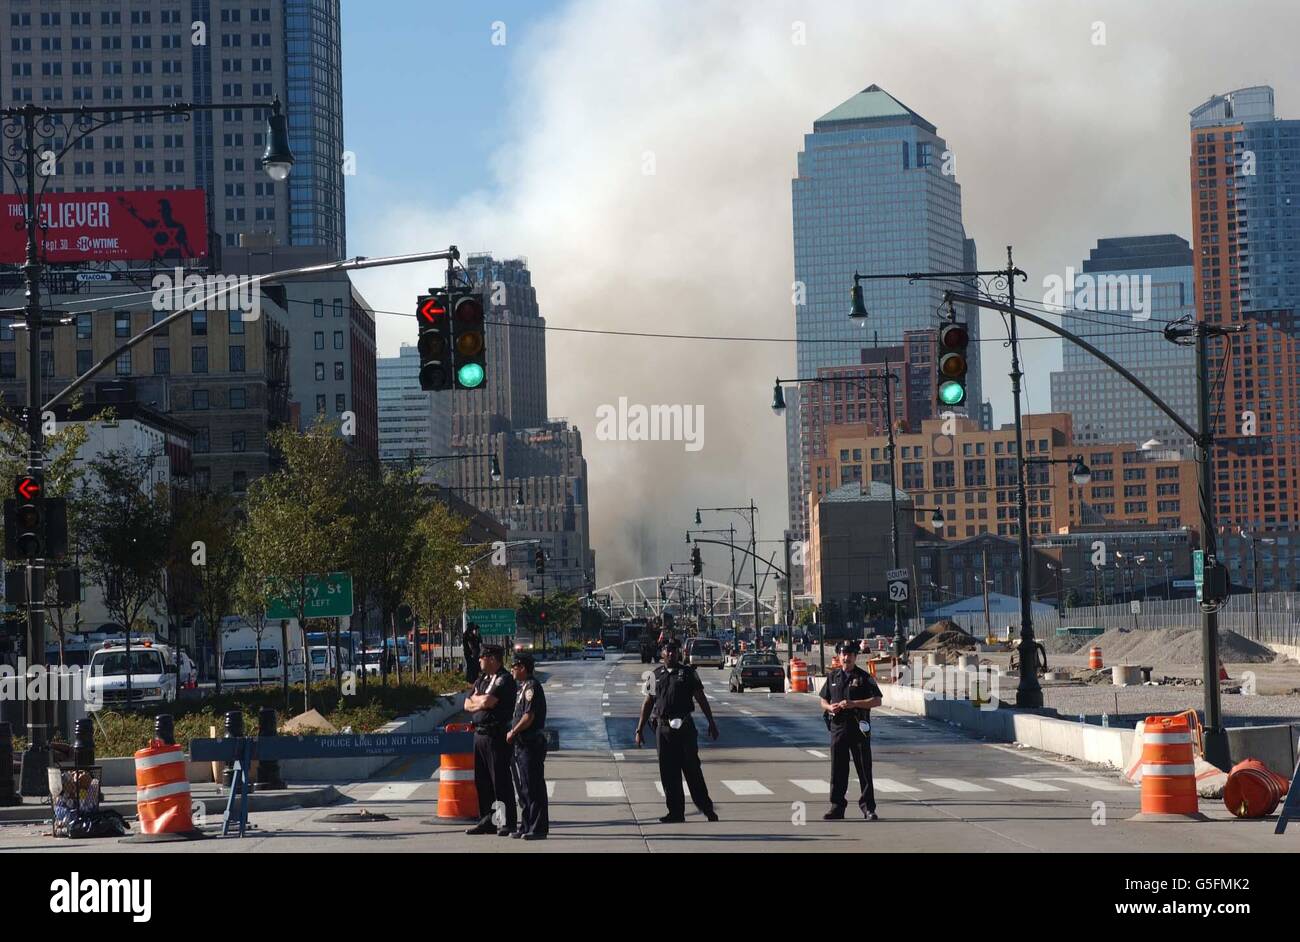 Emergency services near the site of the World Trade Center Manhattan, New York, following the terrorist attack. Stock Photo